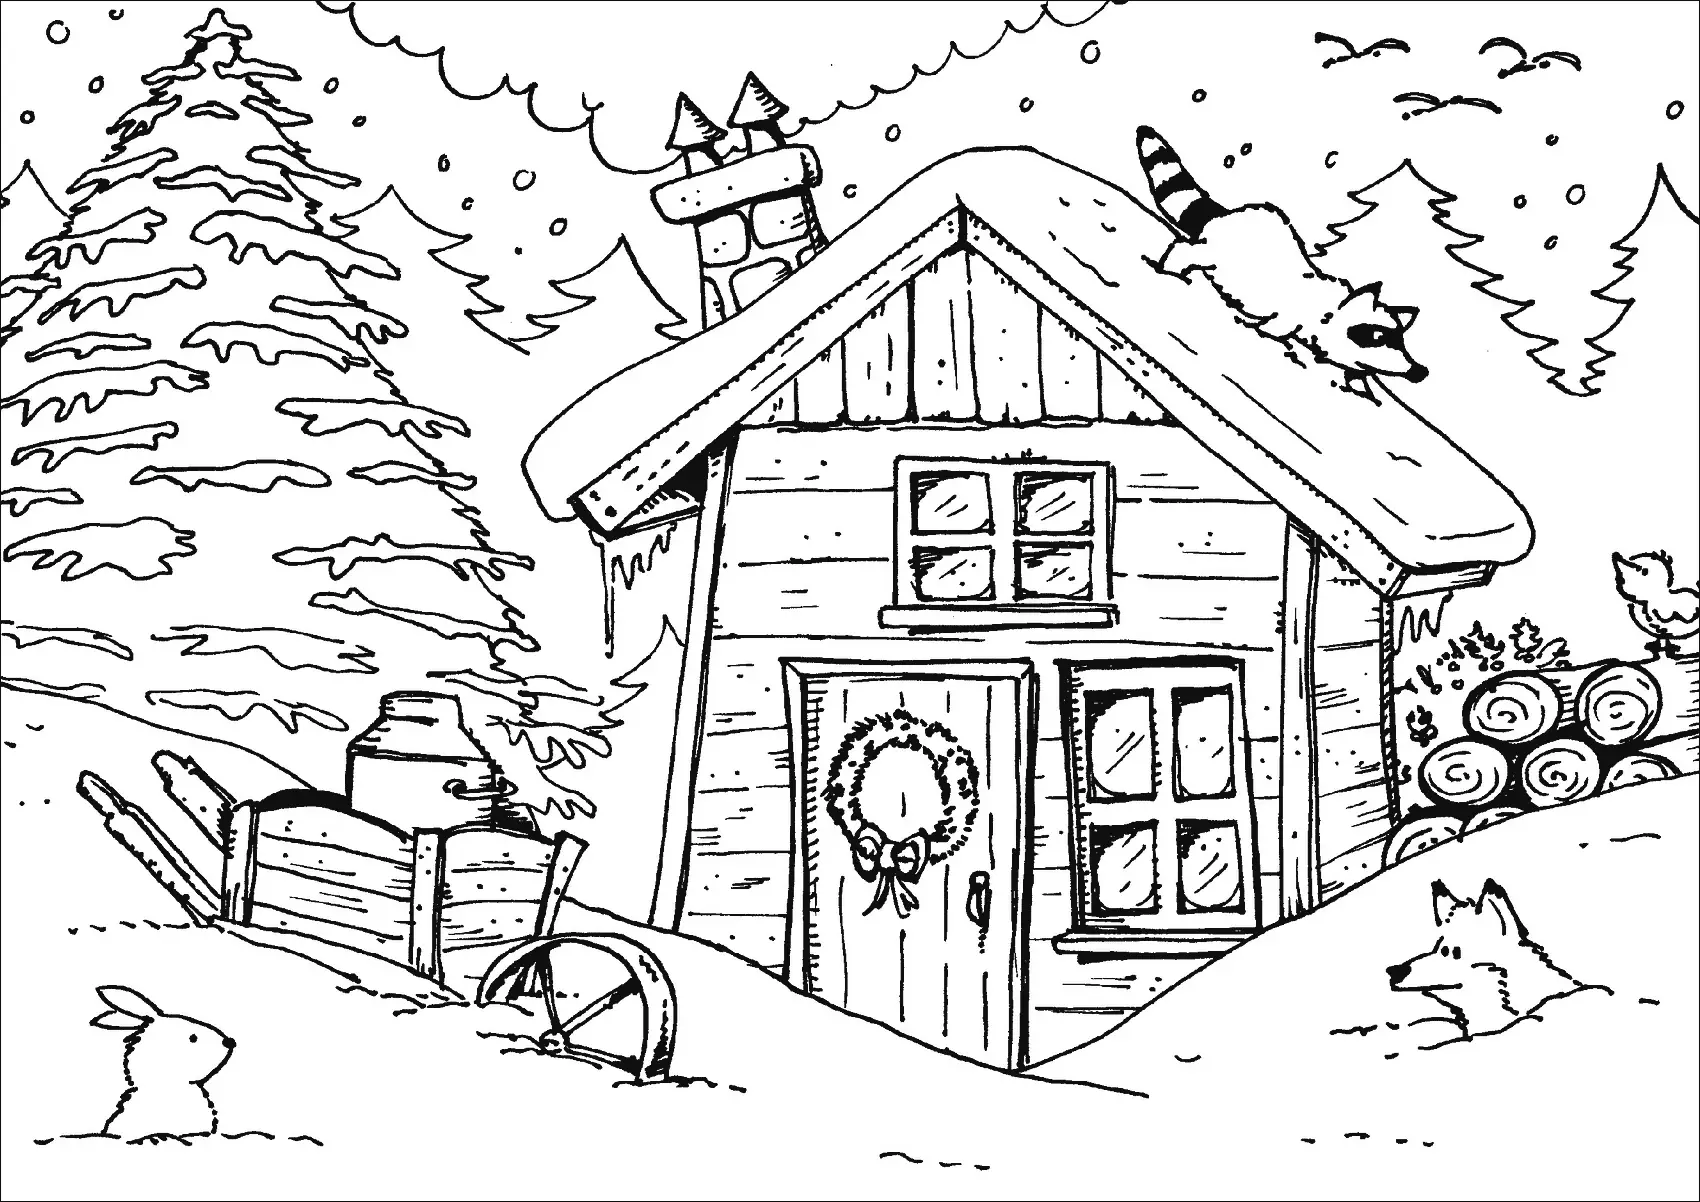 WINTER HUT LODGE CABINS Coloring Pages for Kids Adults Art Activities Line Art